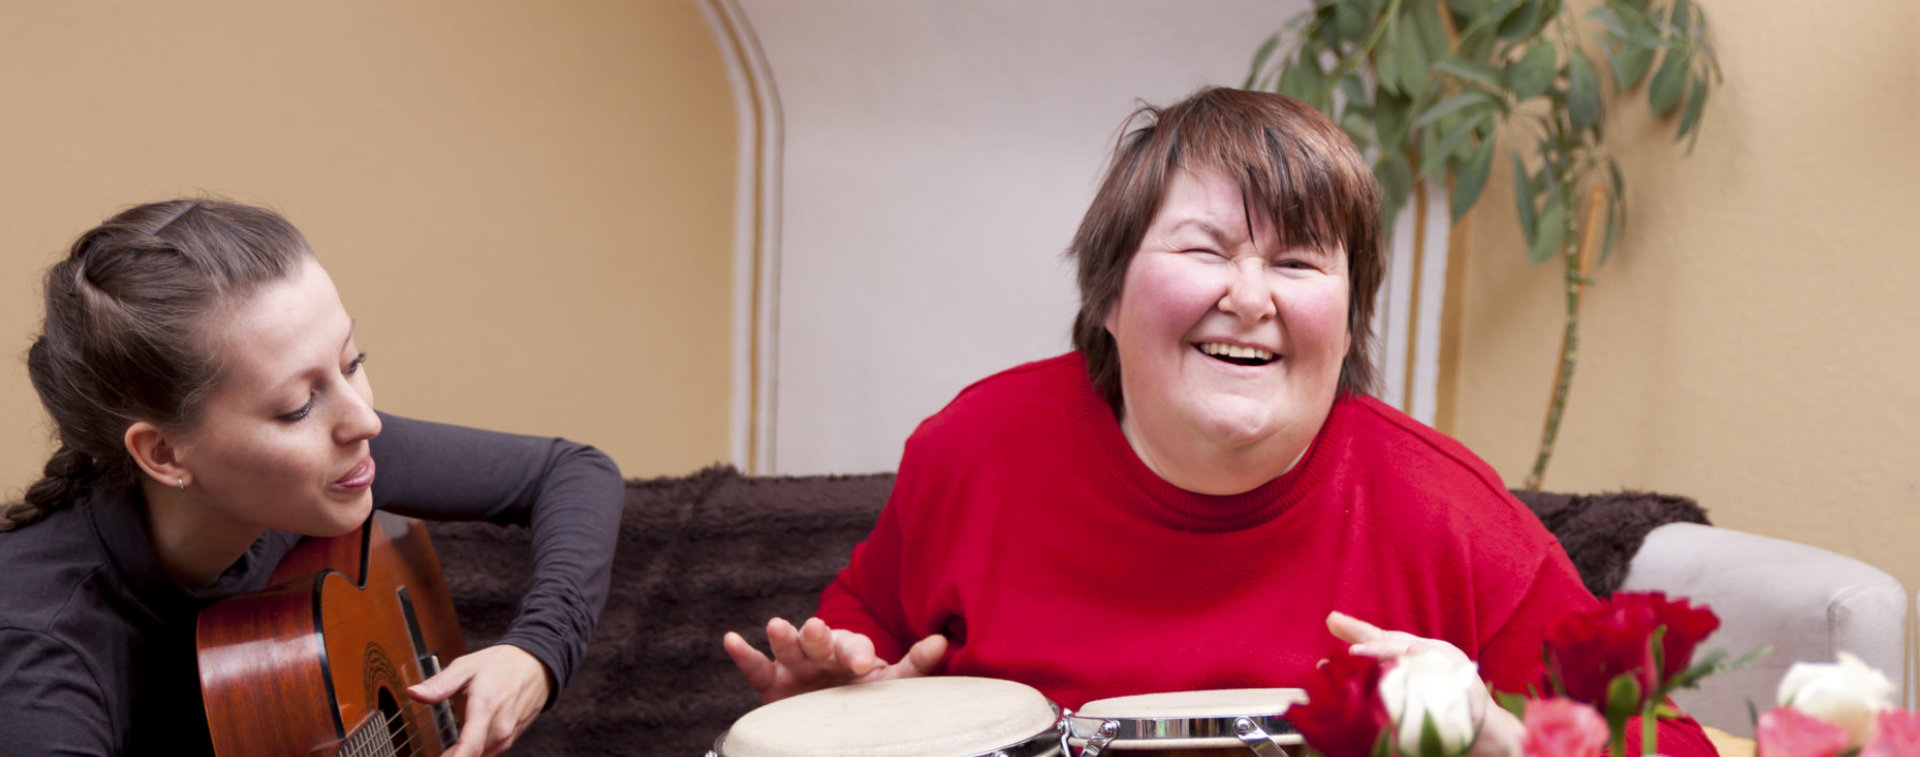 happy woman with disability playing instrument wtih woman